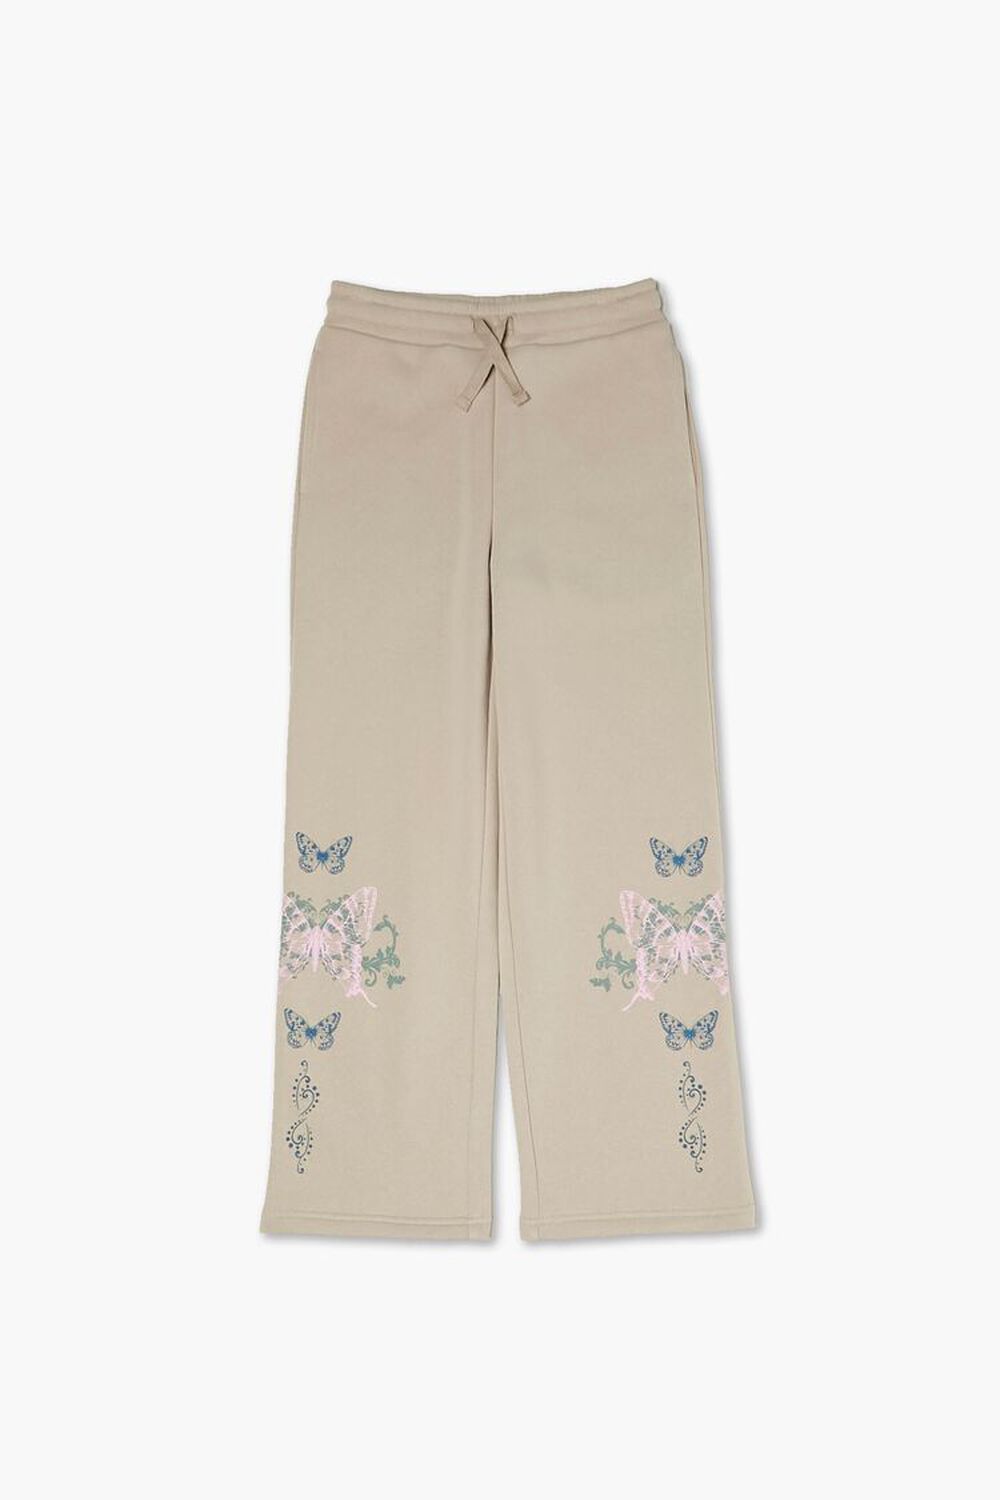 OLIVE/MULTI Girls Butterfly Graphic Sweatpants (Kids), image 1